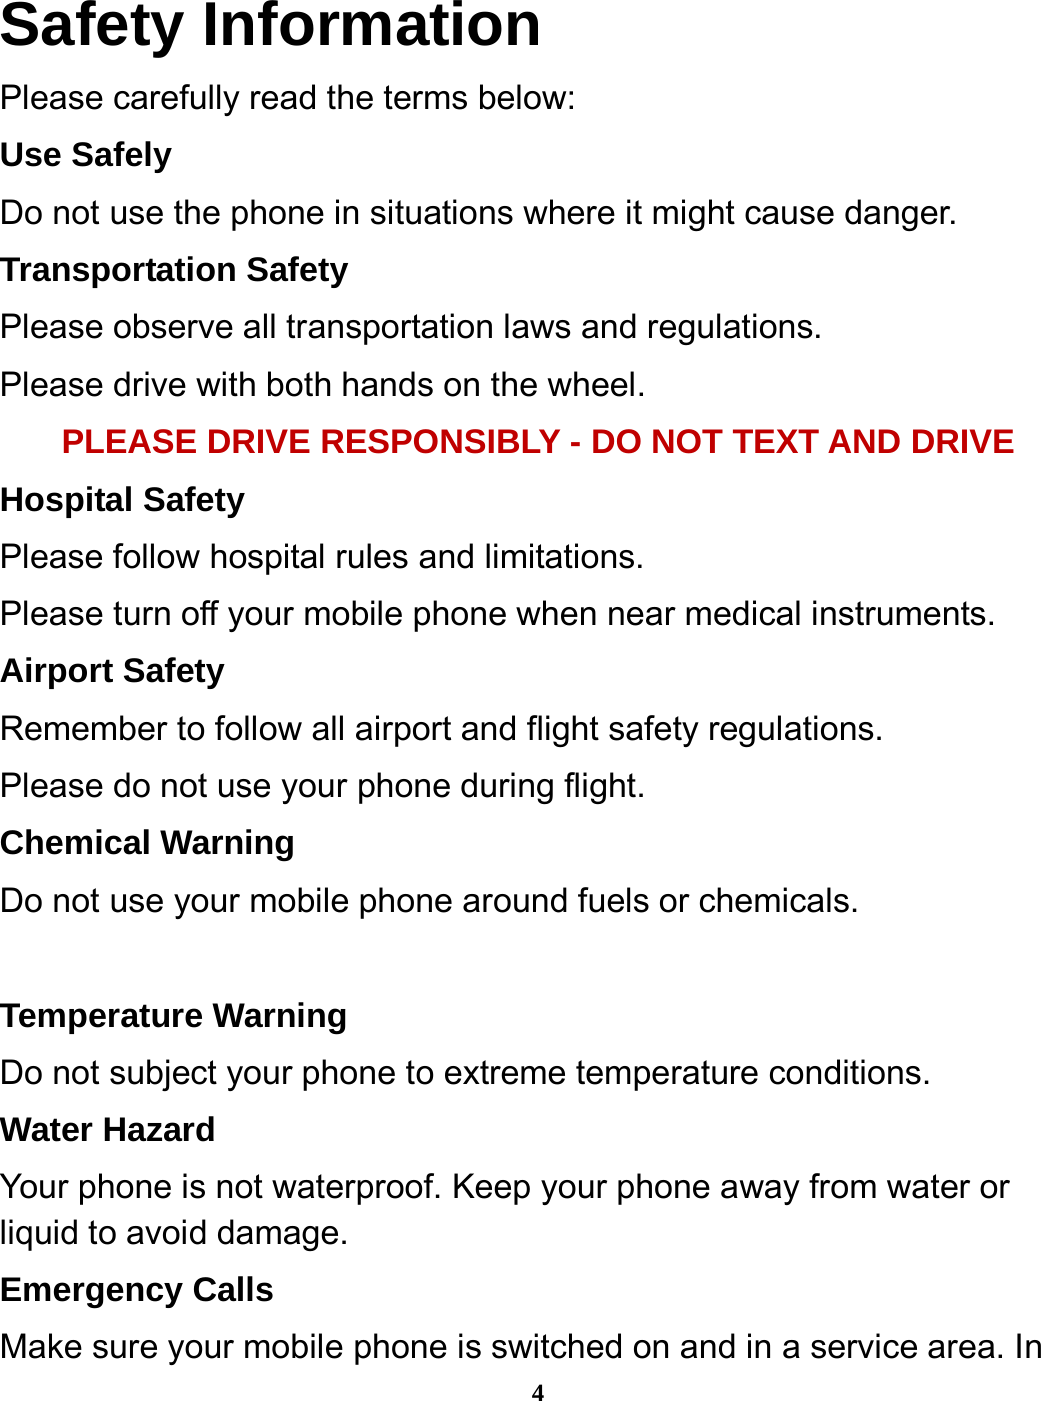  4 Safety Information Please carefully read the terms below: Use Safely Do not use the phone in situations where it might cause danger. Transportation Safety Please observe all transportation laws and regulations. Please drive with both hands on the wheel.   PLEASE DRIVE RESPONSIBLY - DO NOT TEXT AND DRIVE Hospital Safety Please follow hospital rules and limitations. Please turn off your mobile phone when near medical instruments. Airport Safety Remember to follow all airport and flight safety regulations.   Please do not use your phone during flight. Chemical Warning Do not use your mobile phone around fuels or chemicals.  Temperature Warning Do not subject your phone to extreme temperature conditions. Water Hazard   Your phone is not waterproof. Keep your phone away from water or liquid to avoid damage. Emergency Calls Make sure your mobile phone is switched on and in a service area. In 